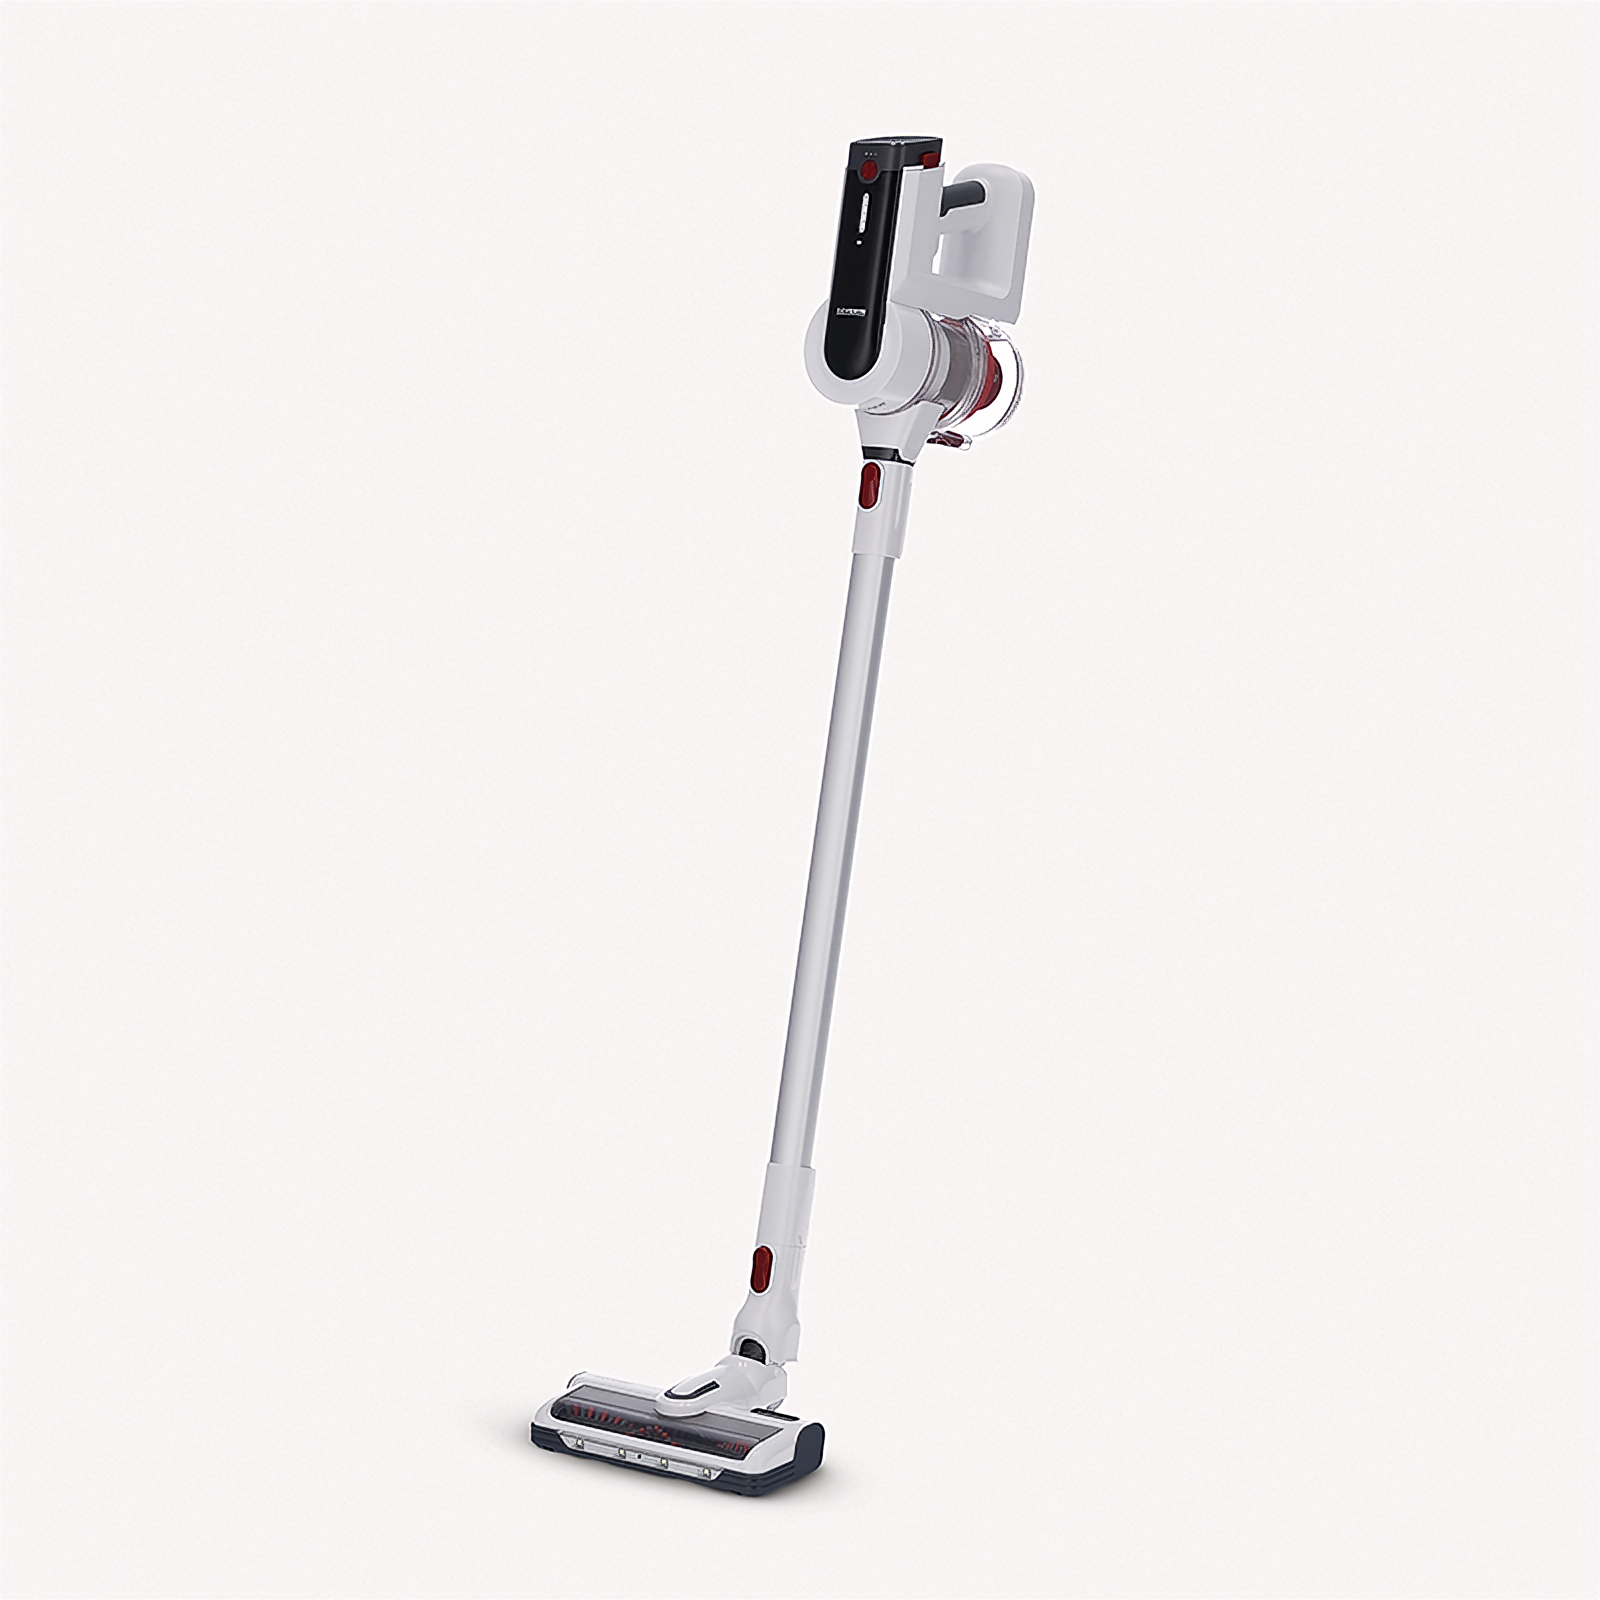 Cordless 2-in-1 hand and - HV SEVERIN (Official) cleaner vacuum 7166 stick